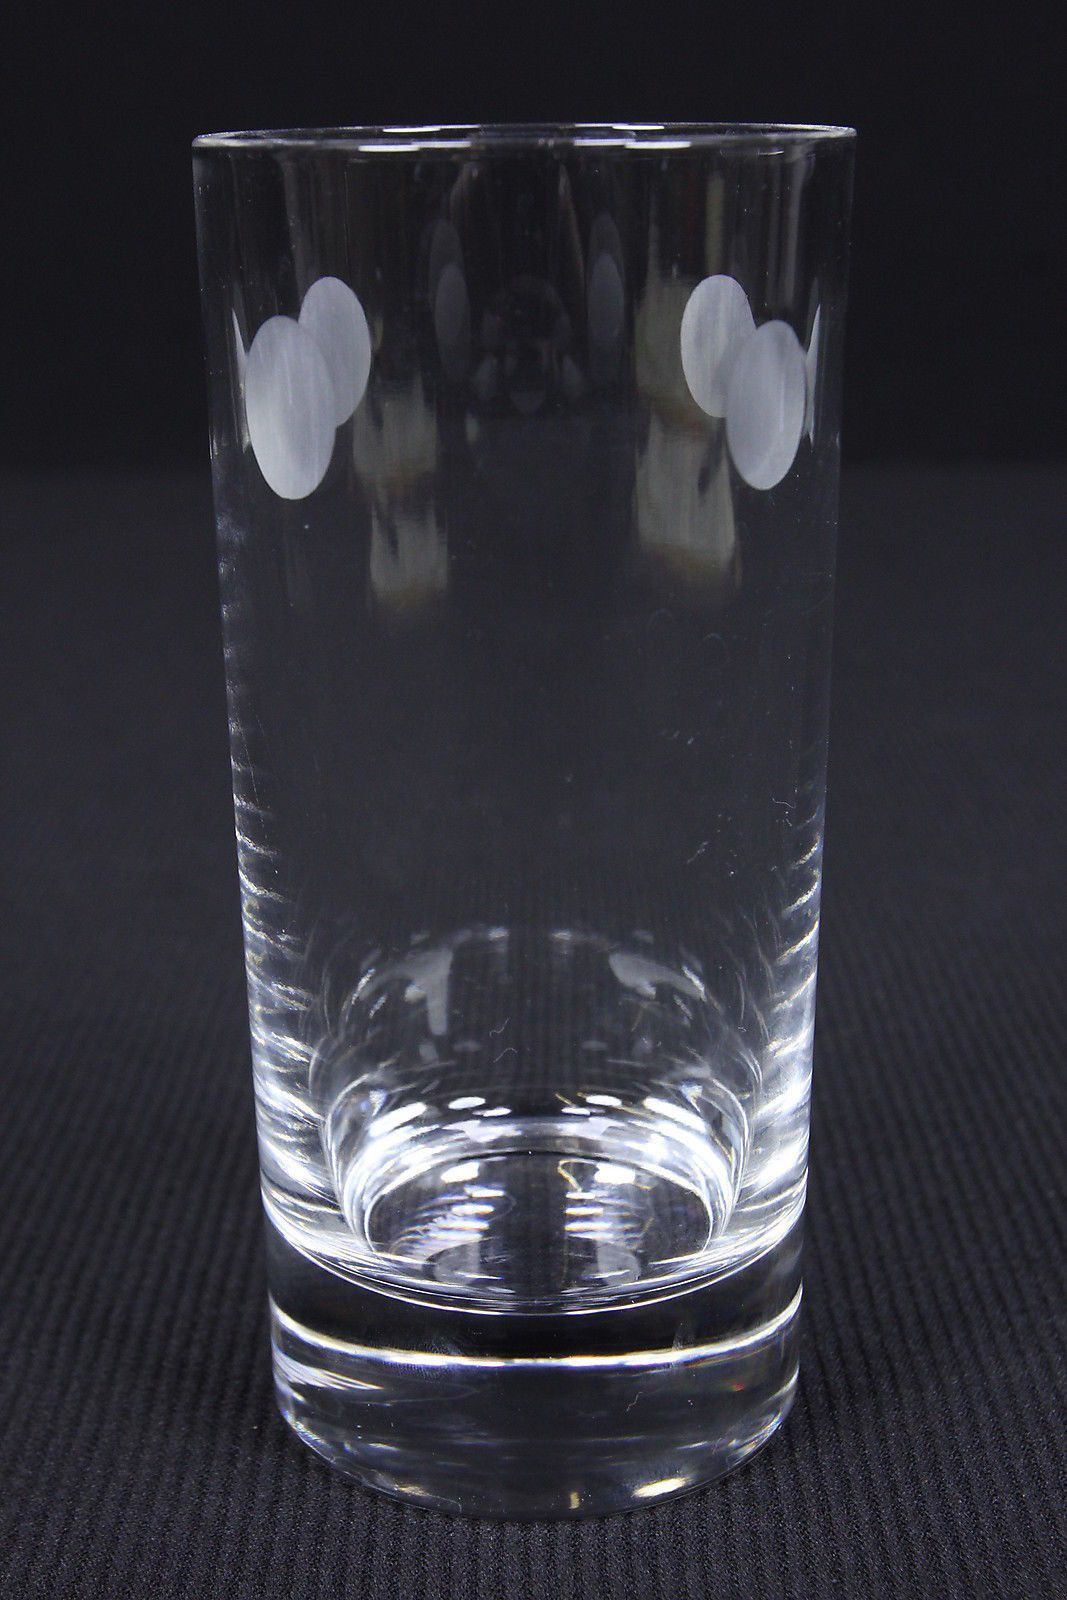 25 Perfect Lenox Crystal Vase 2024 free download lenox crystal vase of old fashioned tumbler results search objects emuseum inside 7 davinci crystal highball barware 12 oz flat tumblers apuania cut oval shapes